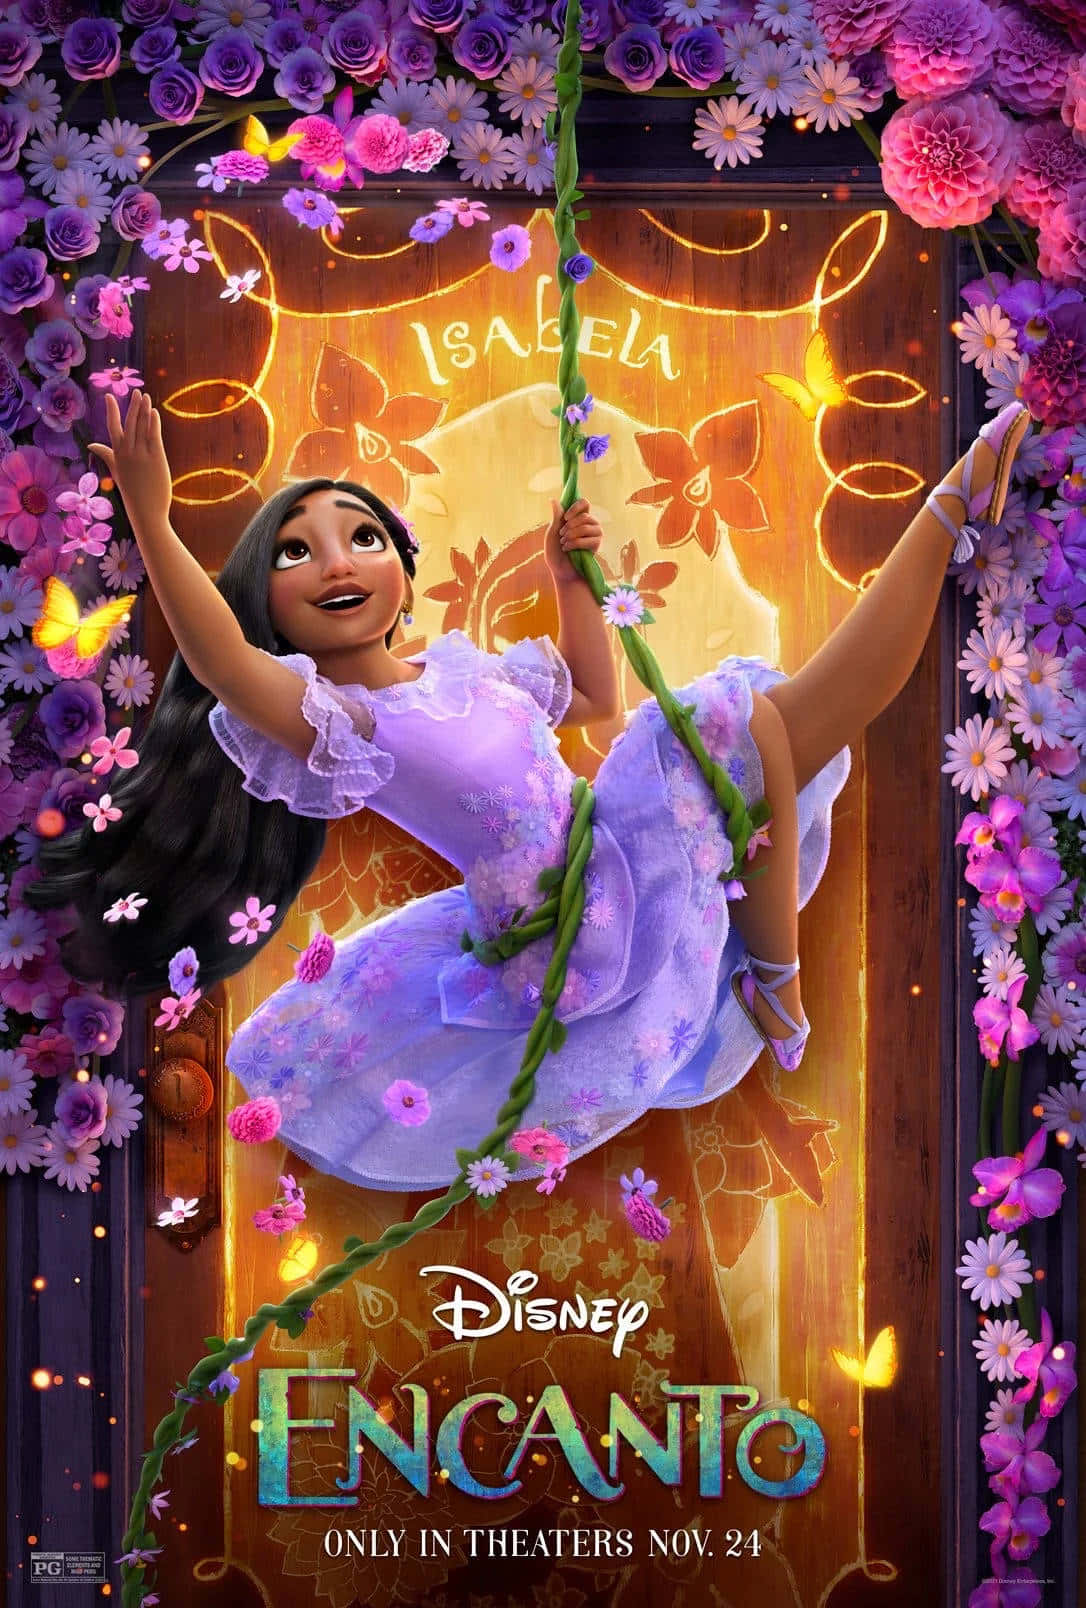 Disney Encanto Poster With A Girl In A Purple Dress